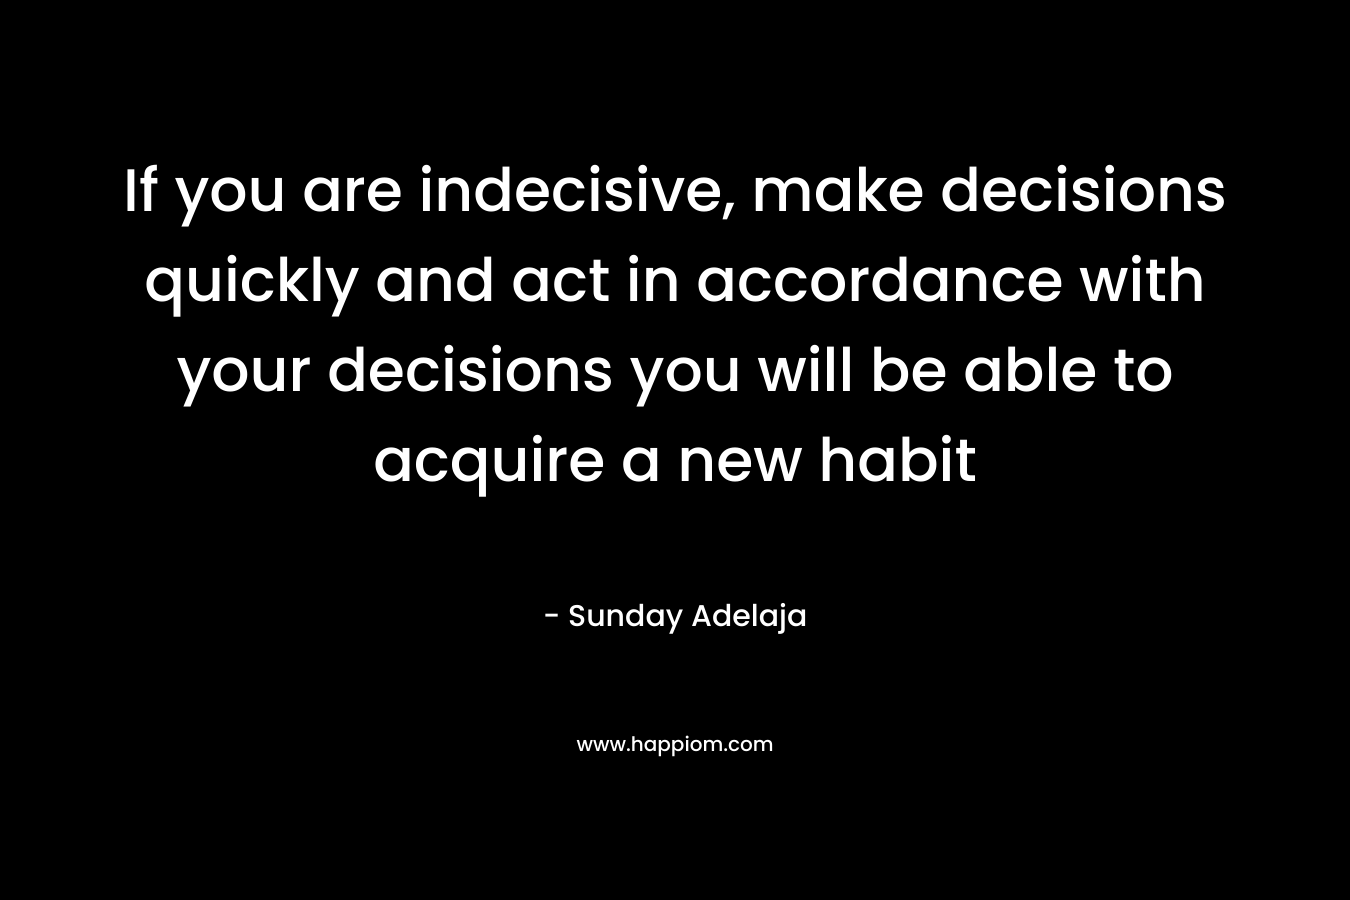 If you are indecisive, make decisions quickly and act in accordance with your decisions you will be able to acquire a new habit